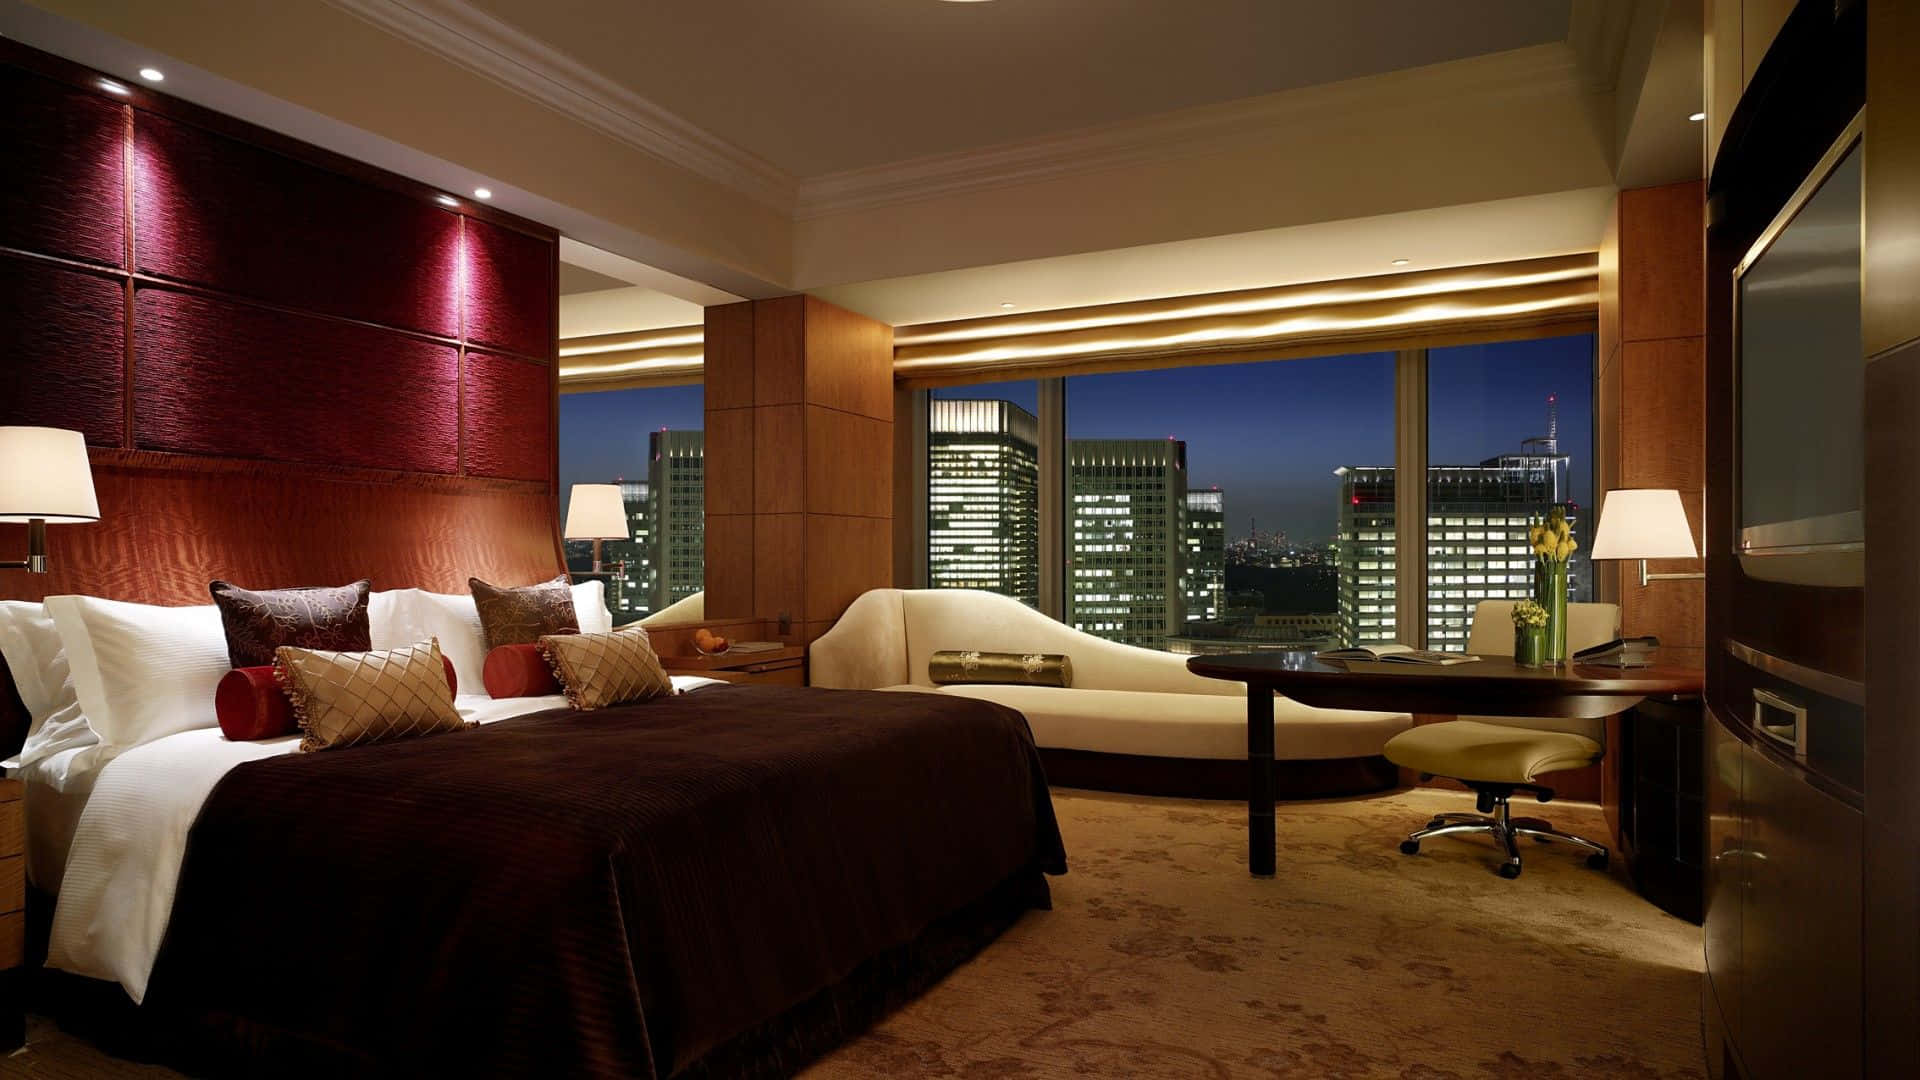 Luxurious Hotel Room with Modern Decor